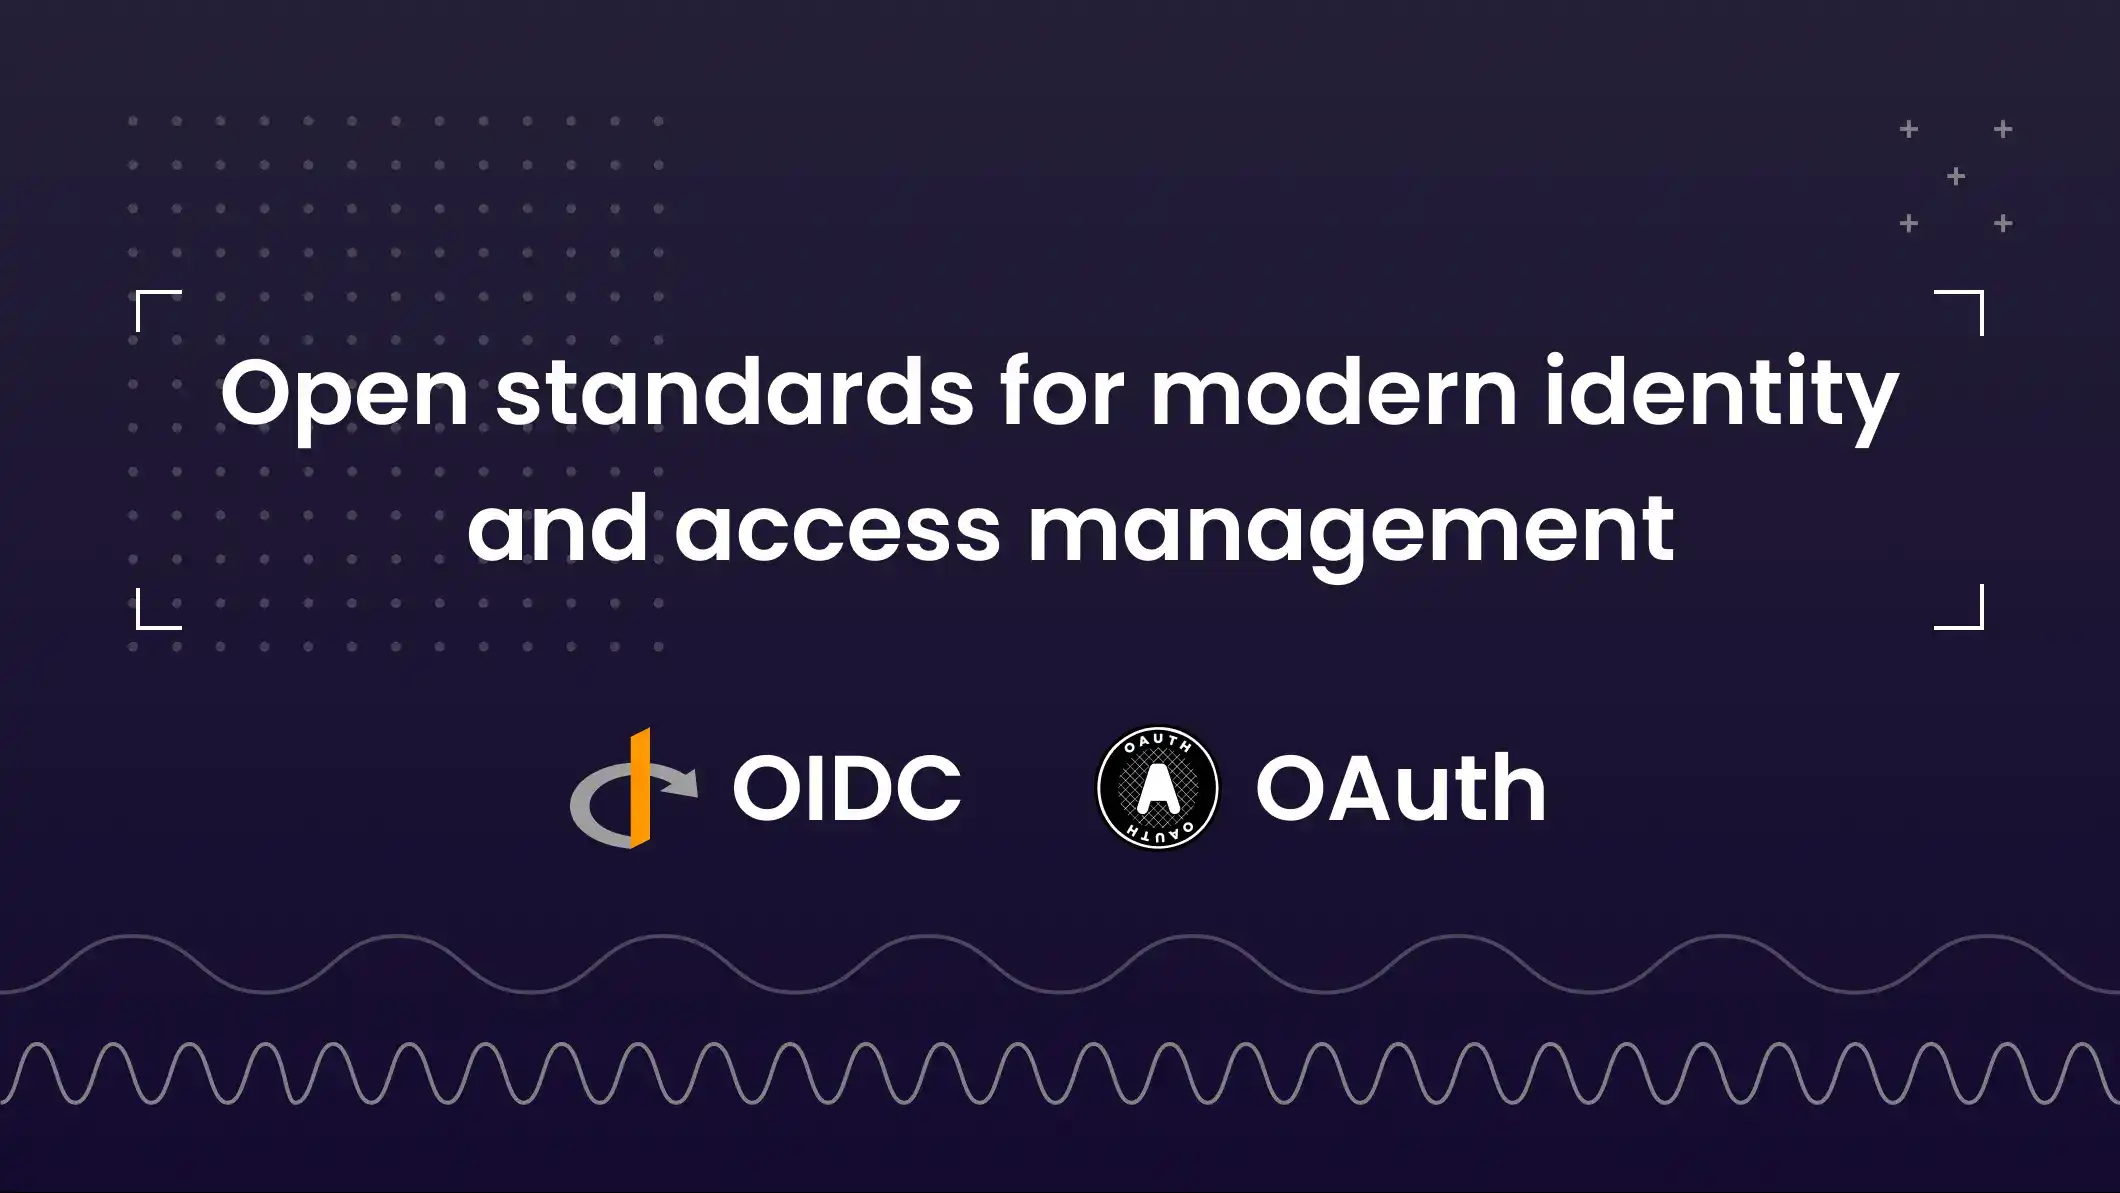 Why open standards are the choice for modern identity and access management